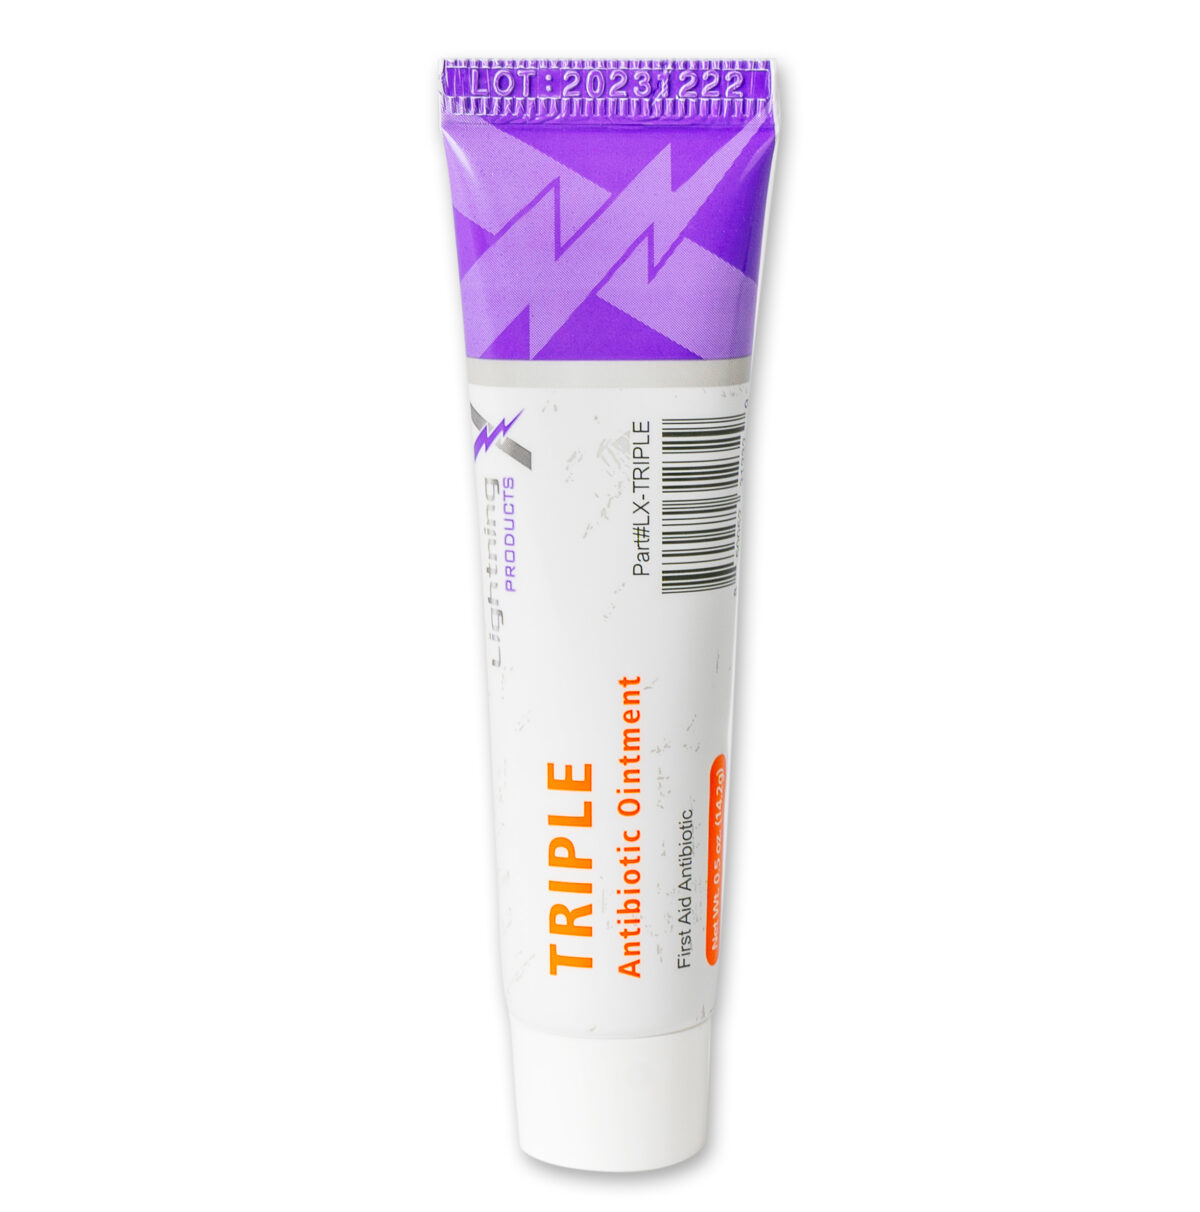 lightning x triple antibiotic ointment tube 05. oz 1/2 ounce for first aid kits cuts scrapes burns